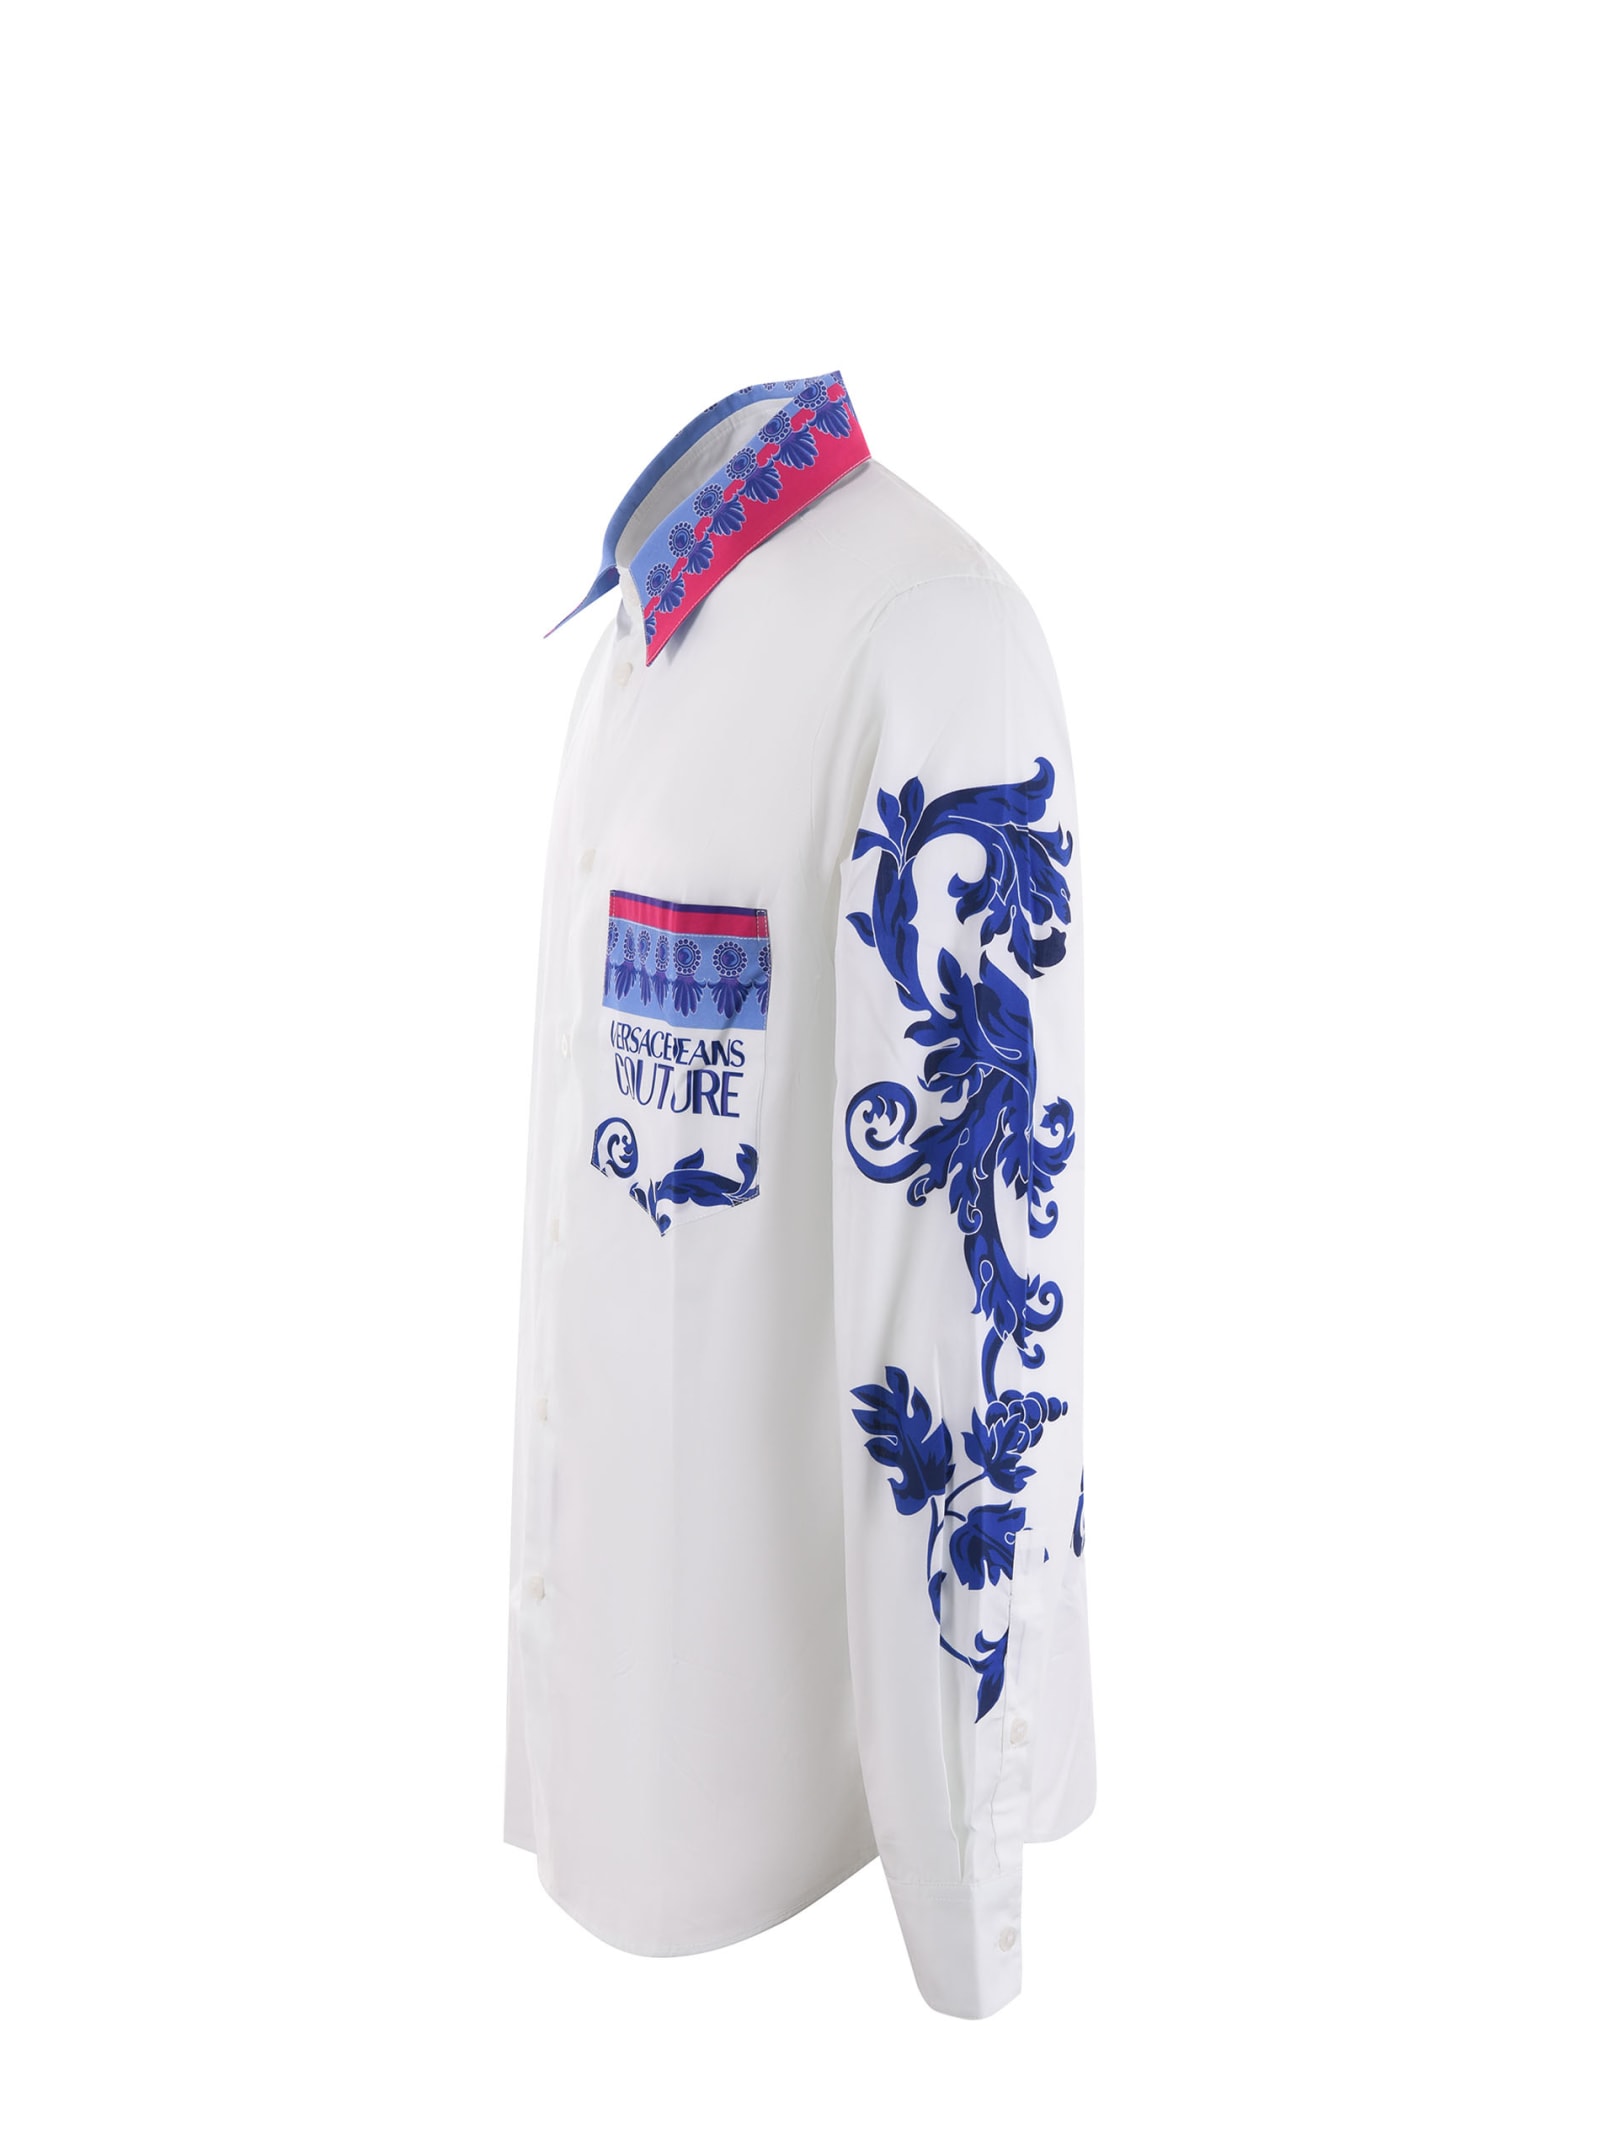 Shop Versace Jeans Couture Shirt In Bianco/multicolor